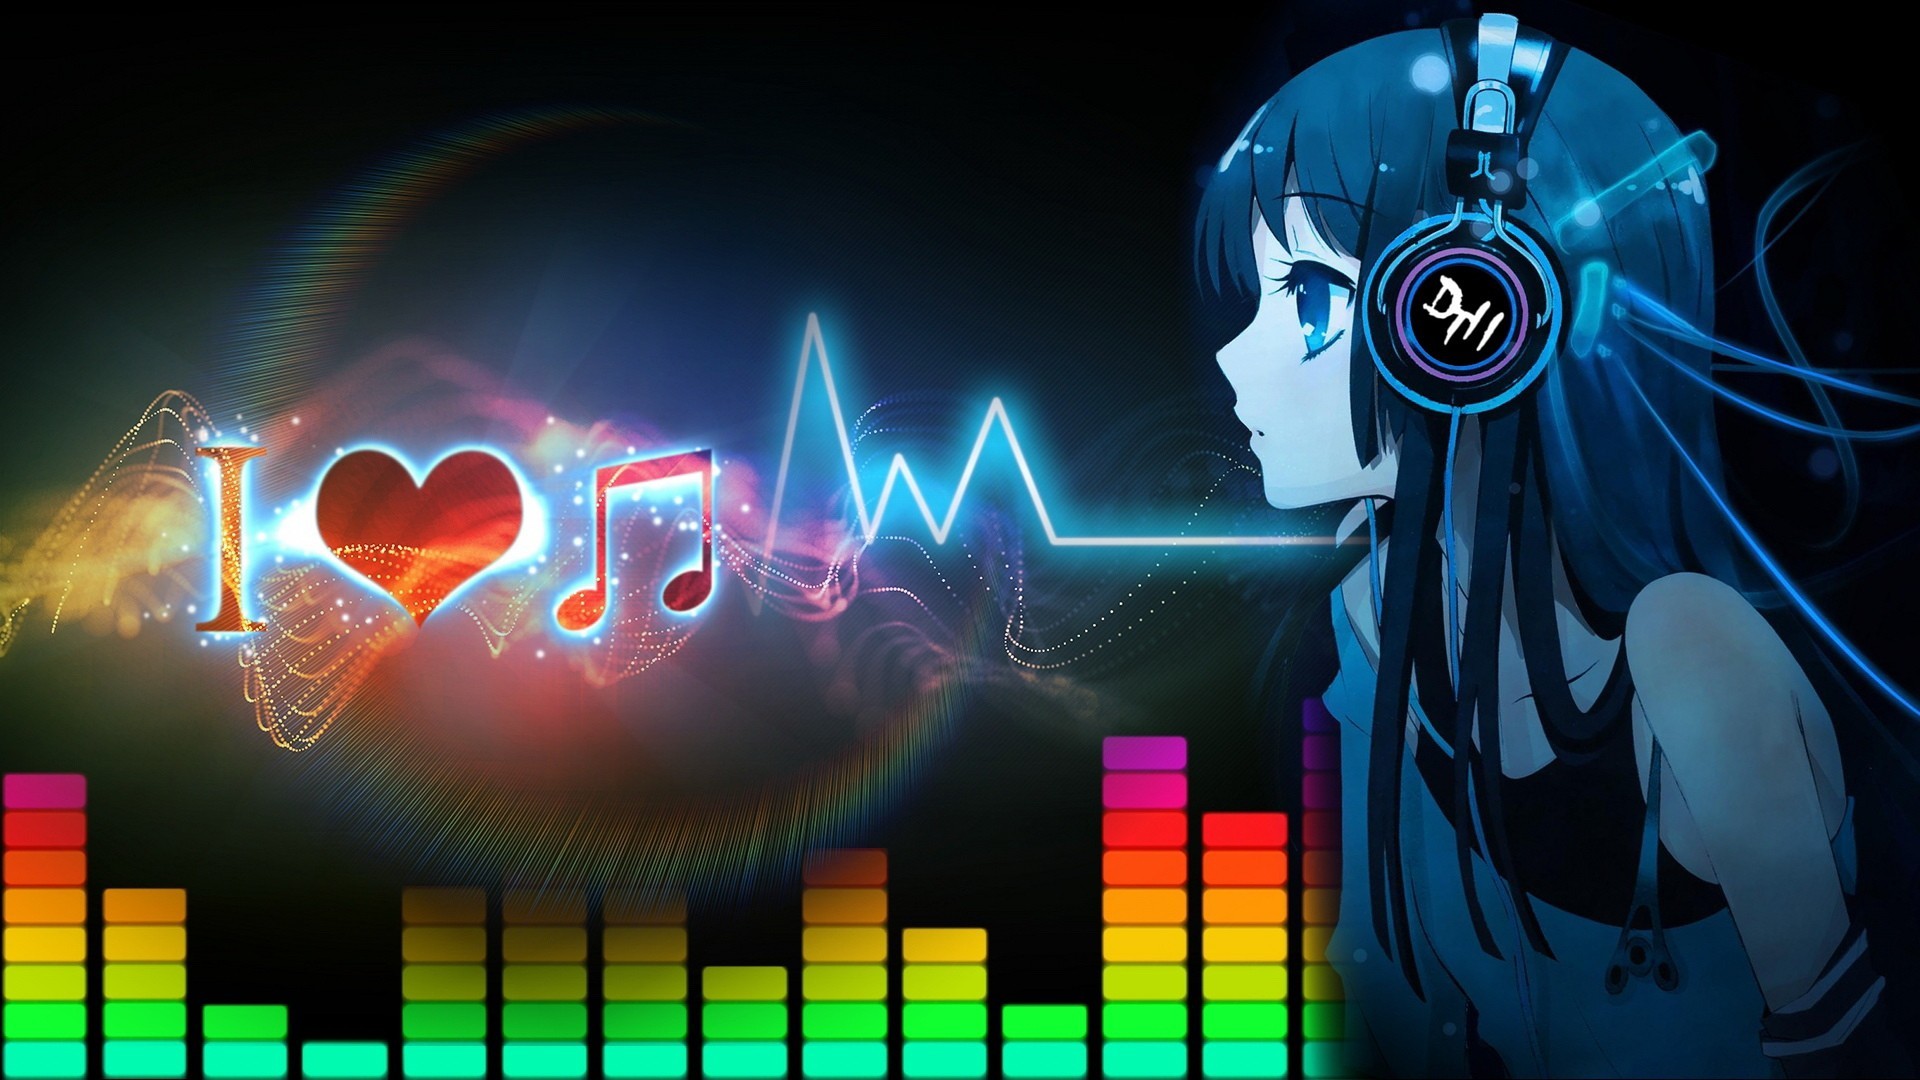 Cute Anime Girl Listening Music Wallpaper Download | MobCup